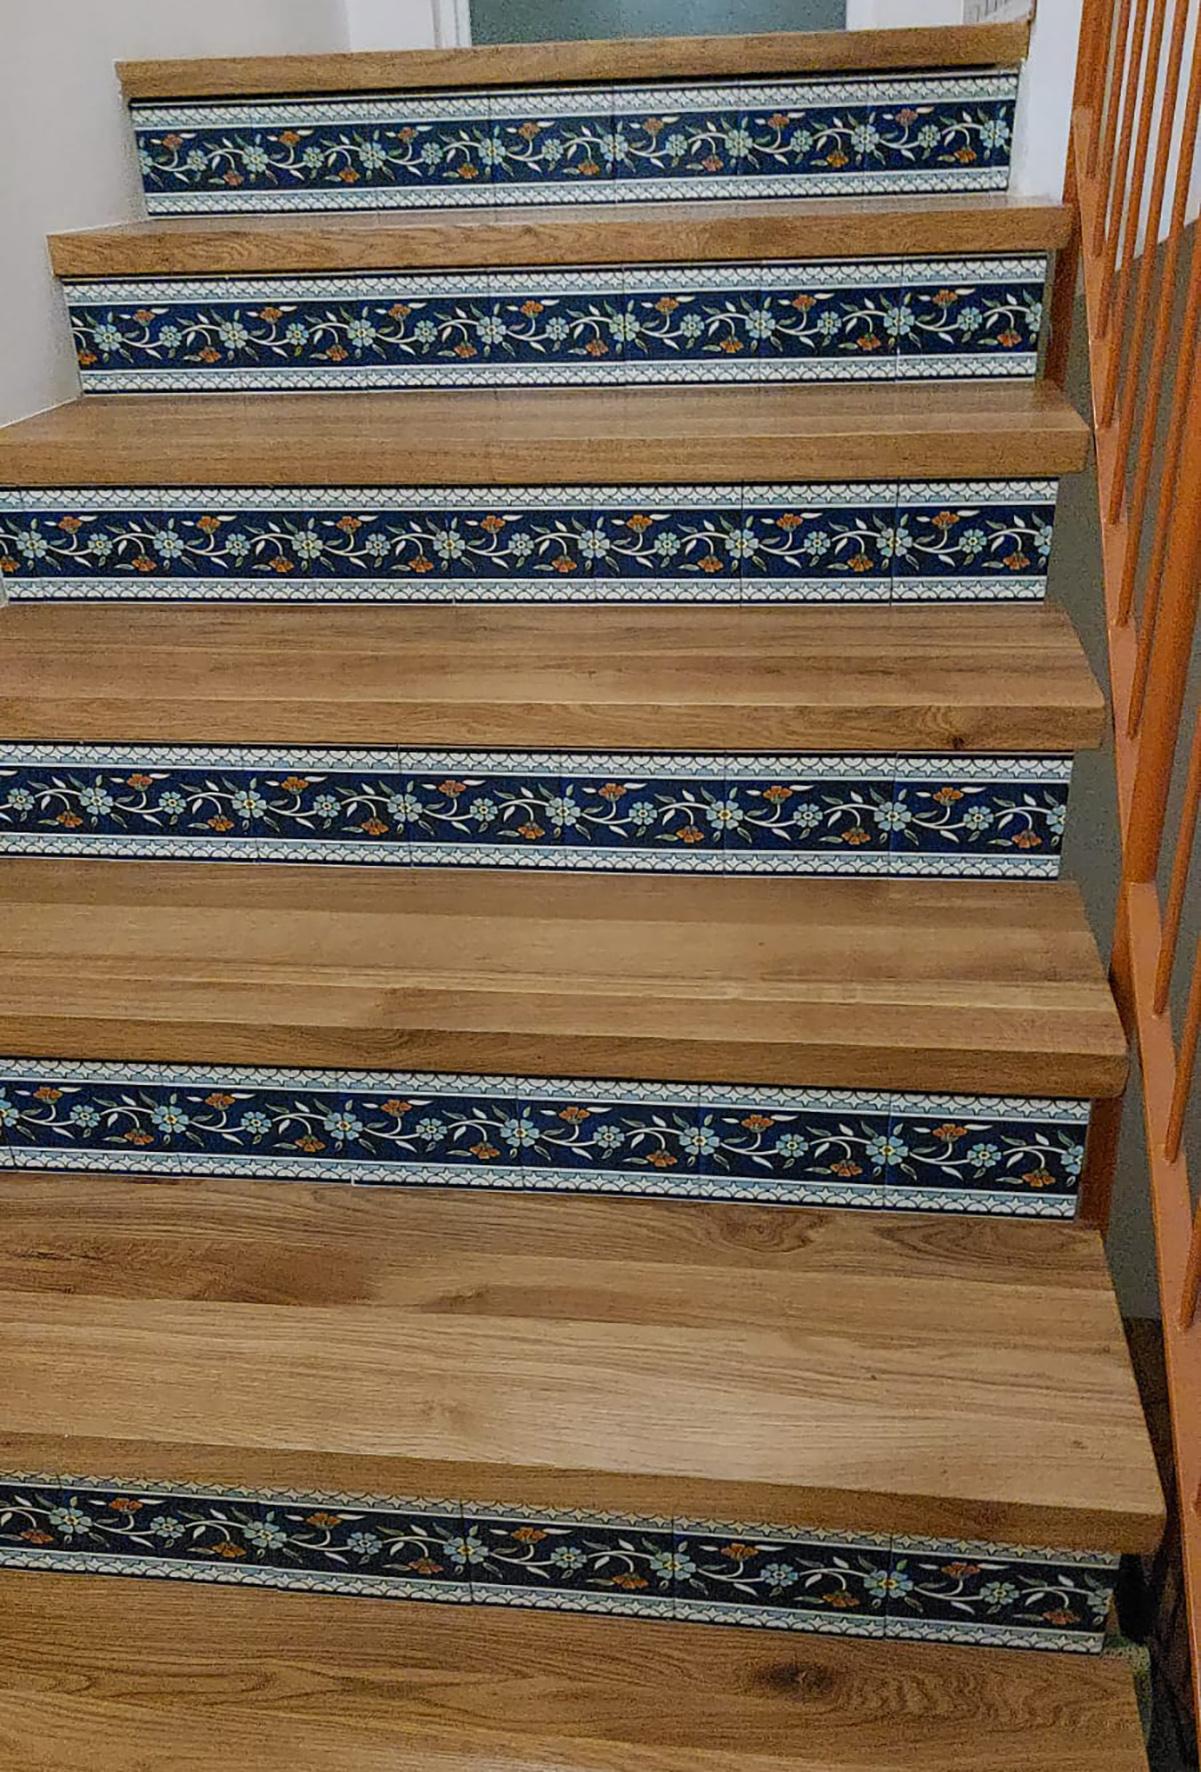 ceramic tiles inserted in a wooden staircase as risers